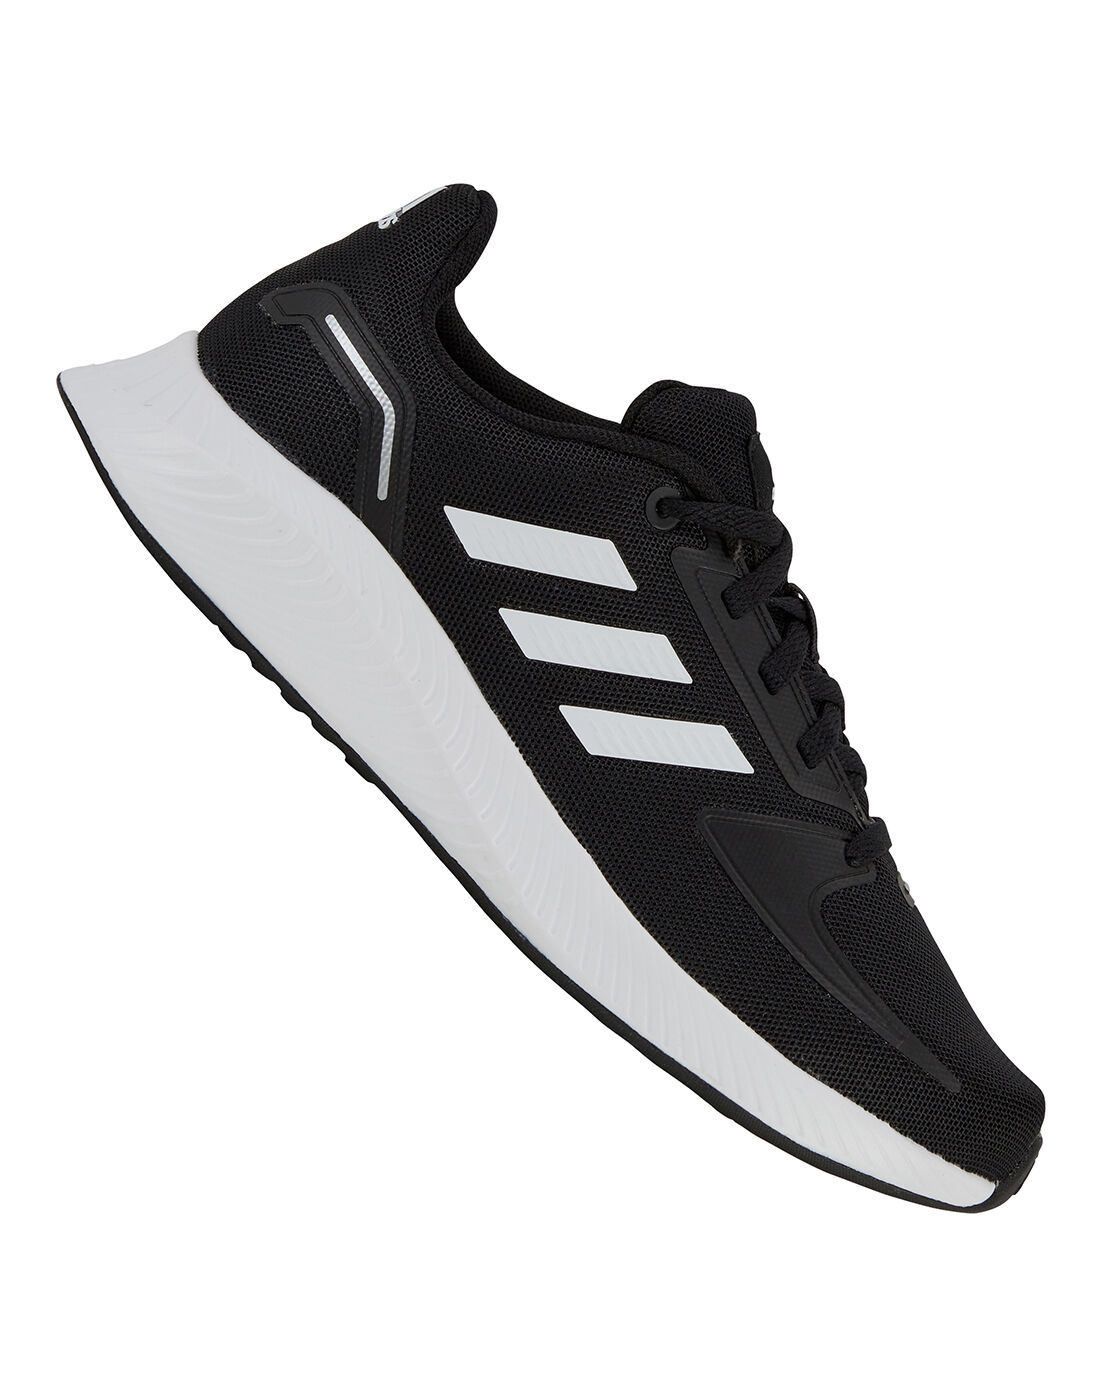 total sports adidas shoes